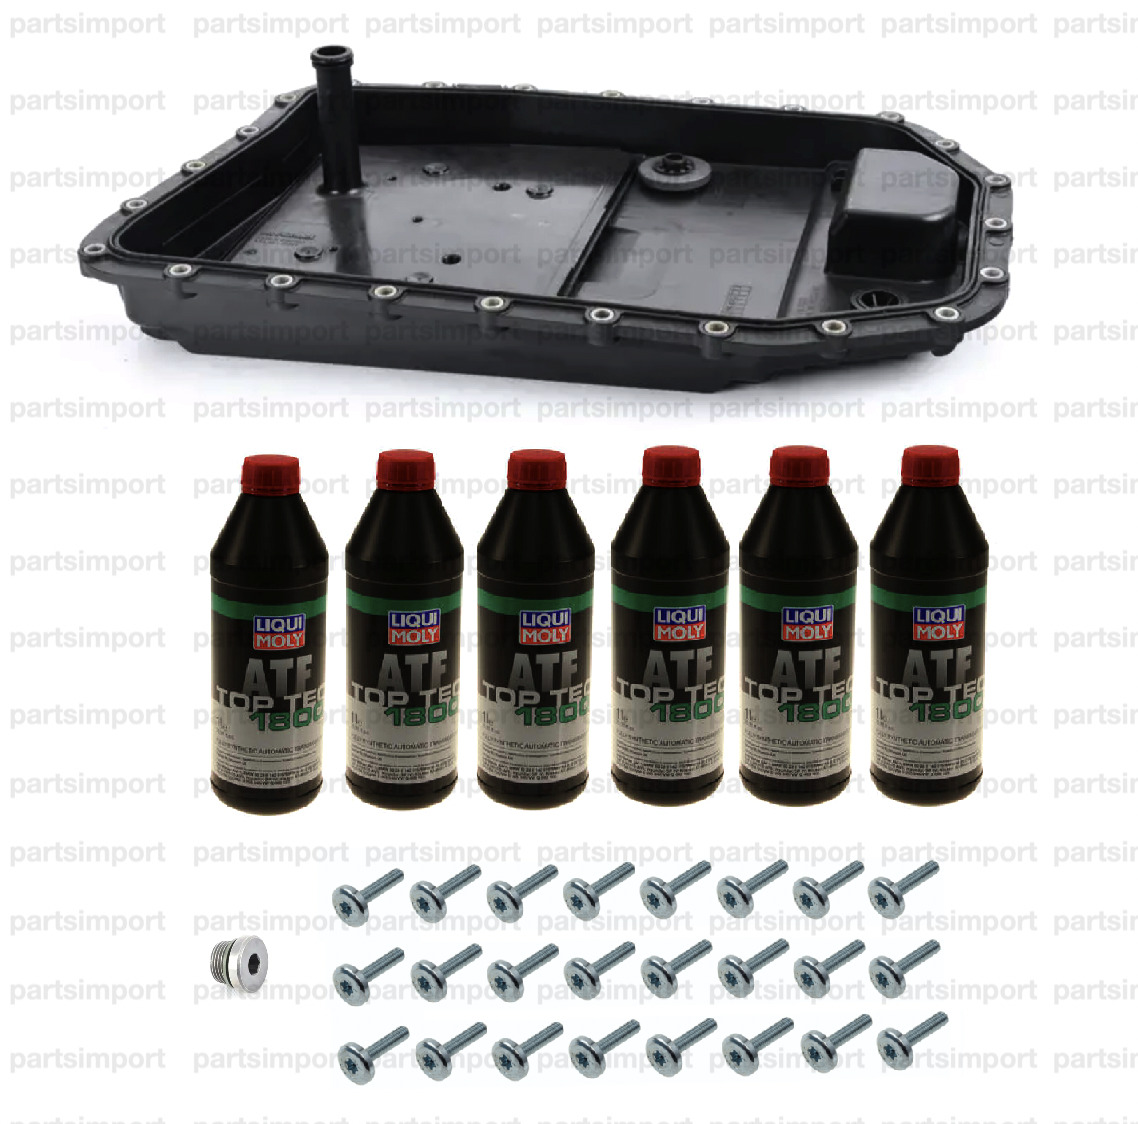 ZF OEM Auto Trans Service Kit (Oil Pan+Filter+Gasket+24 Bolts) + 6L ATF for BMW